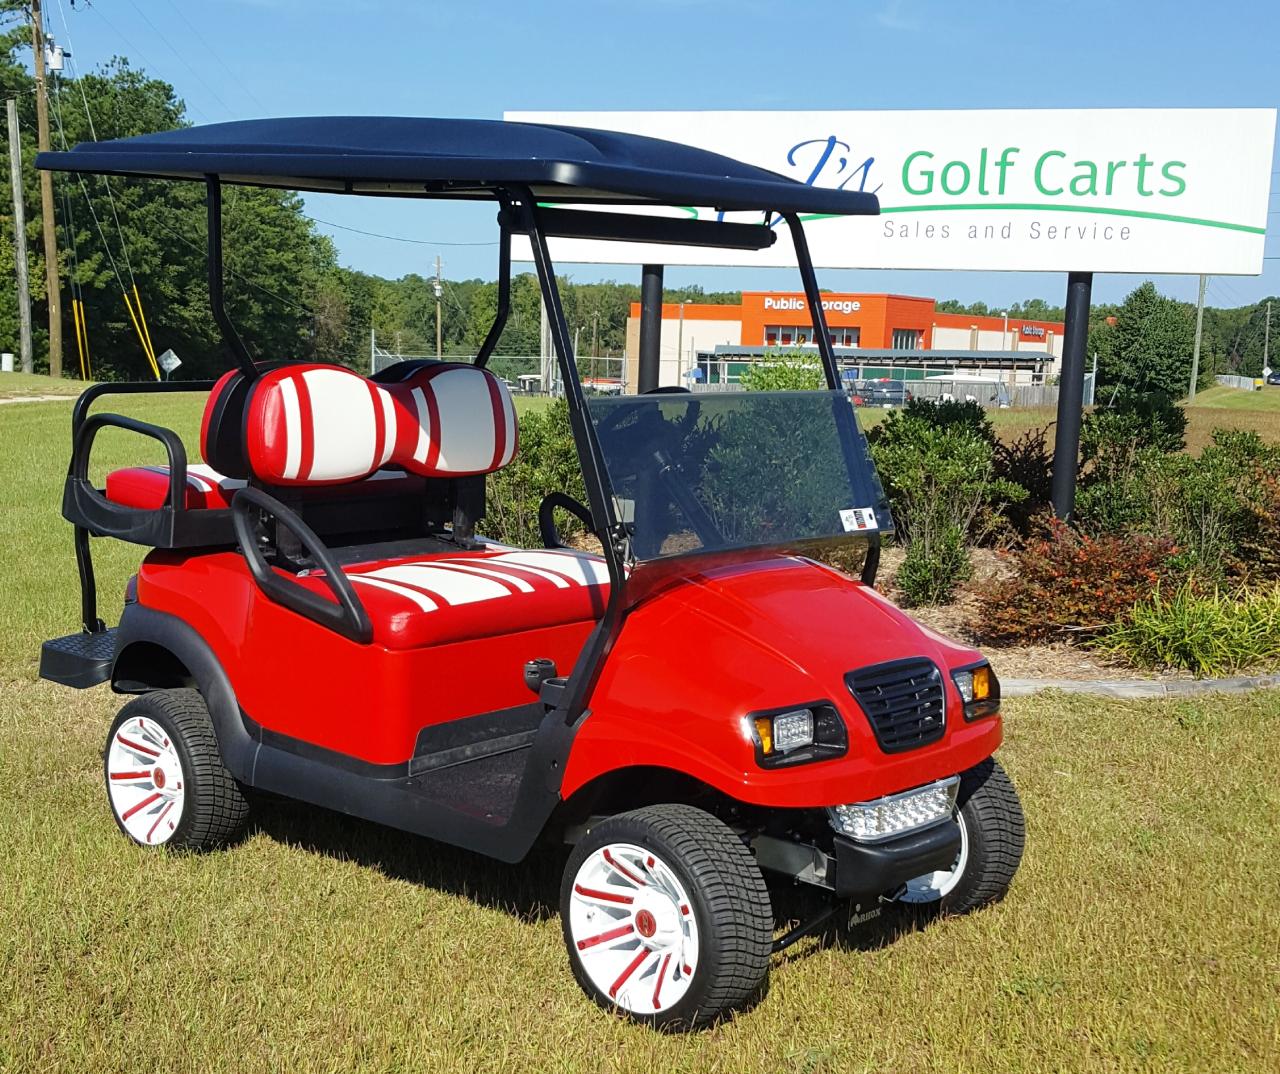 Used Golf Carts for Sale by Owner in Hendry, Florida: Your Ultimate Guide